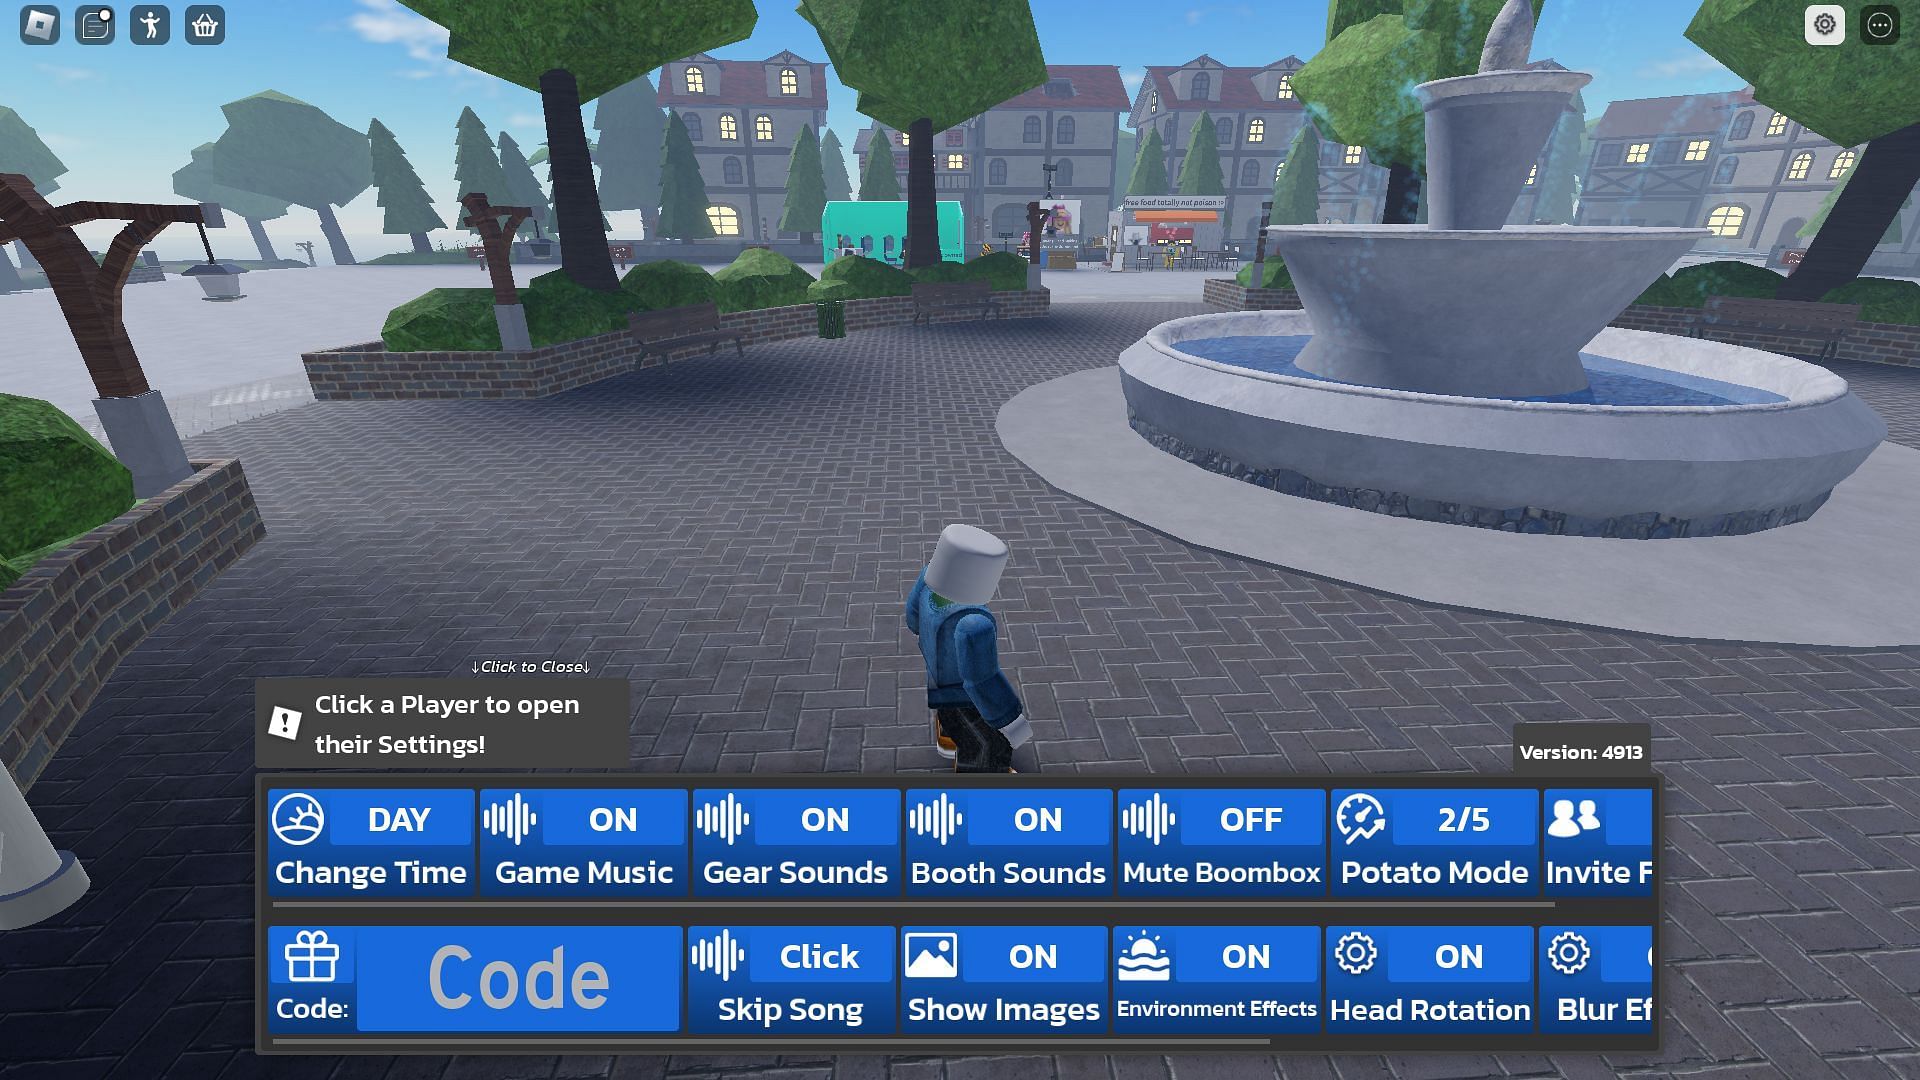 Active codes for Booth Game (Image via Roblox)